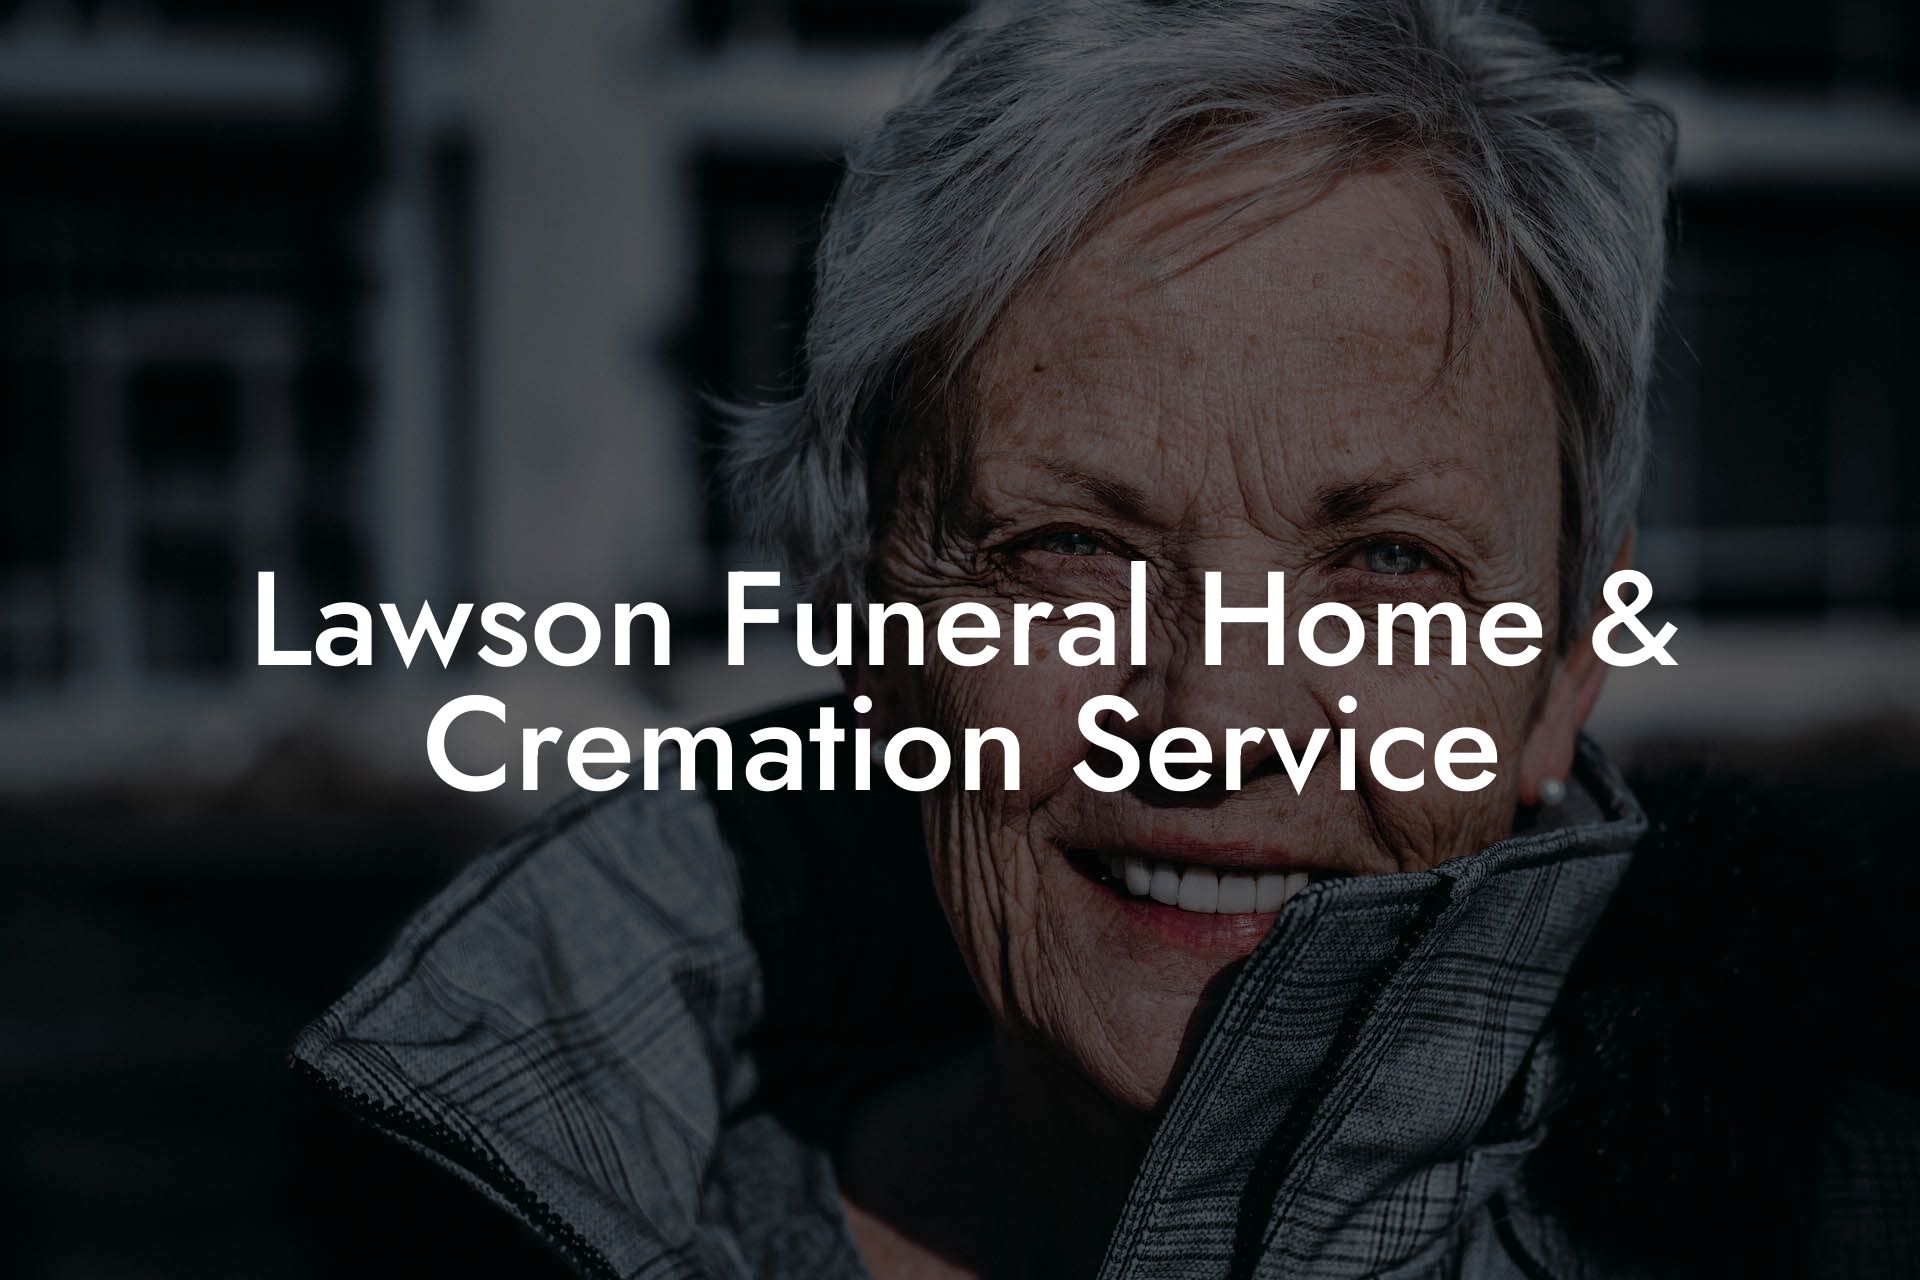 Lawson Funeral Home & Cremation Service